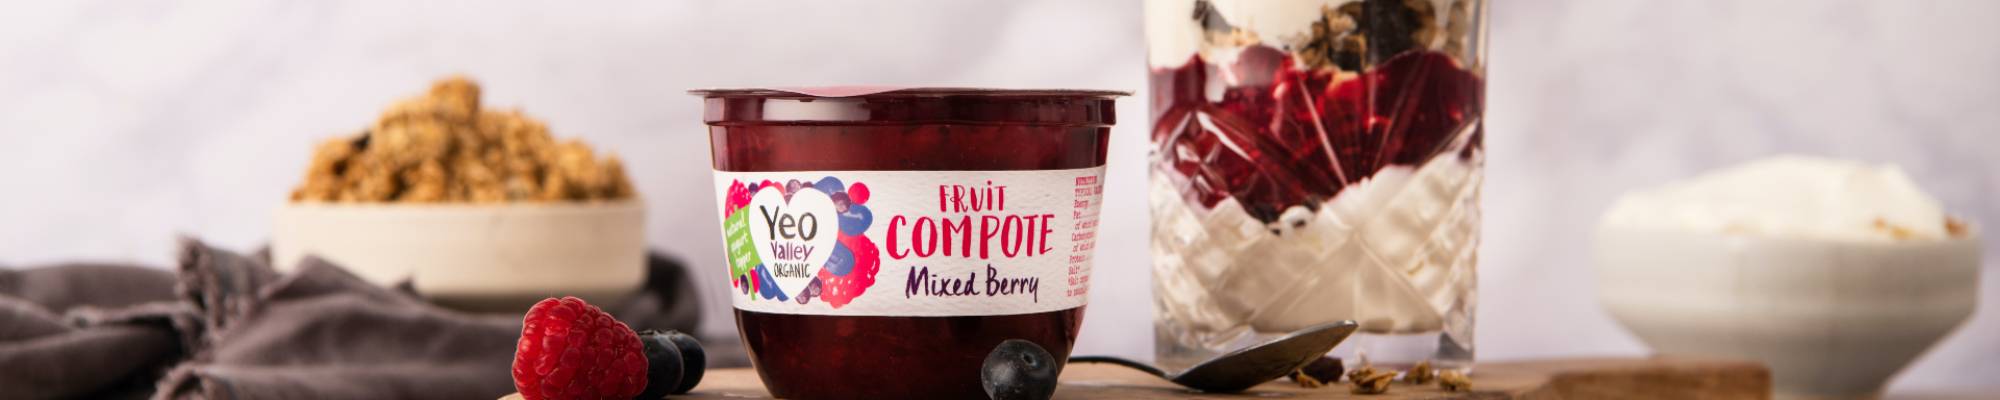 Yeo Valley Organic Mixed Berry Compote